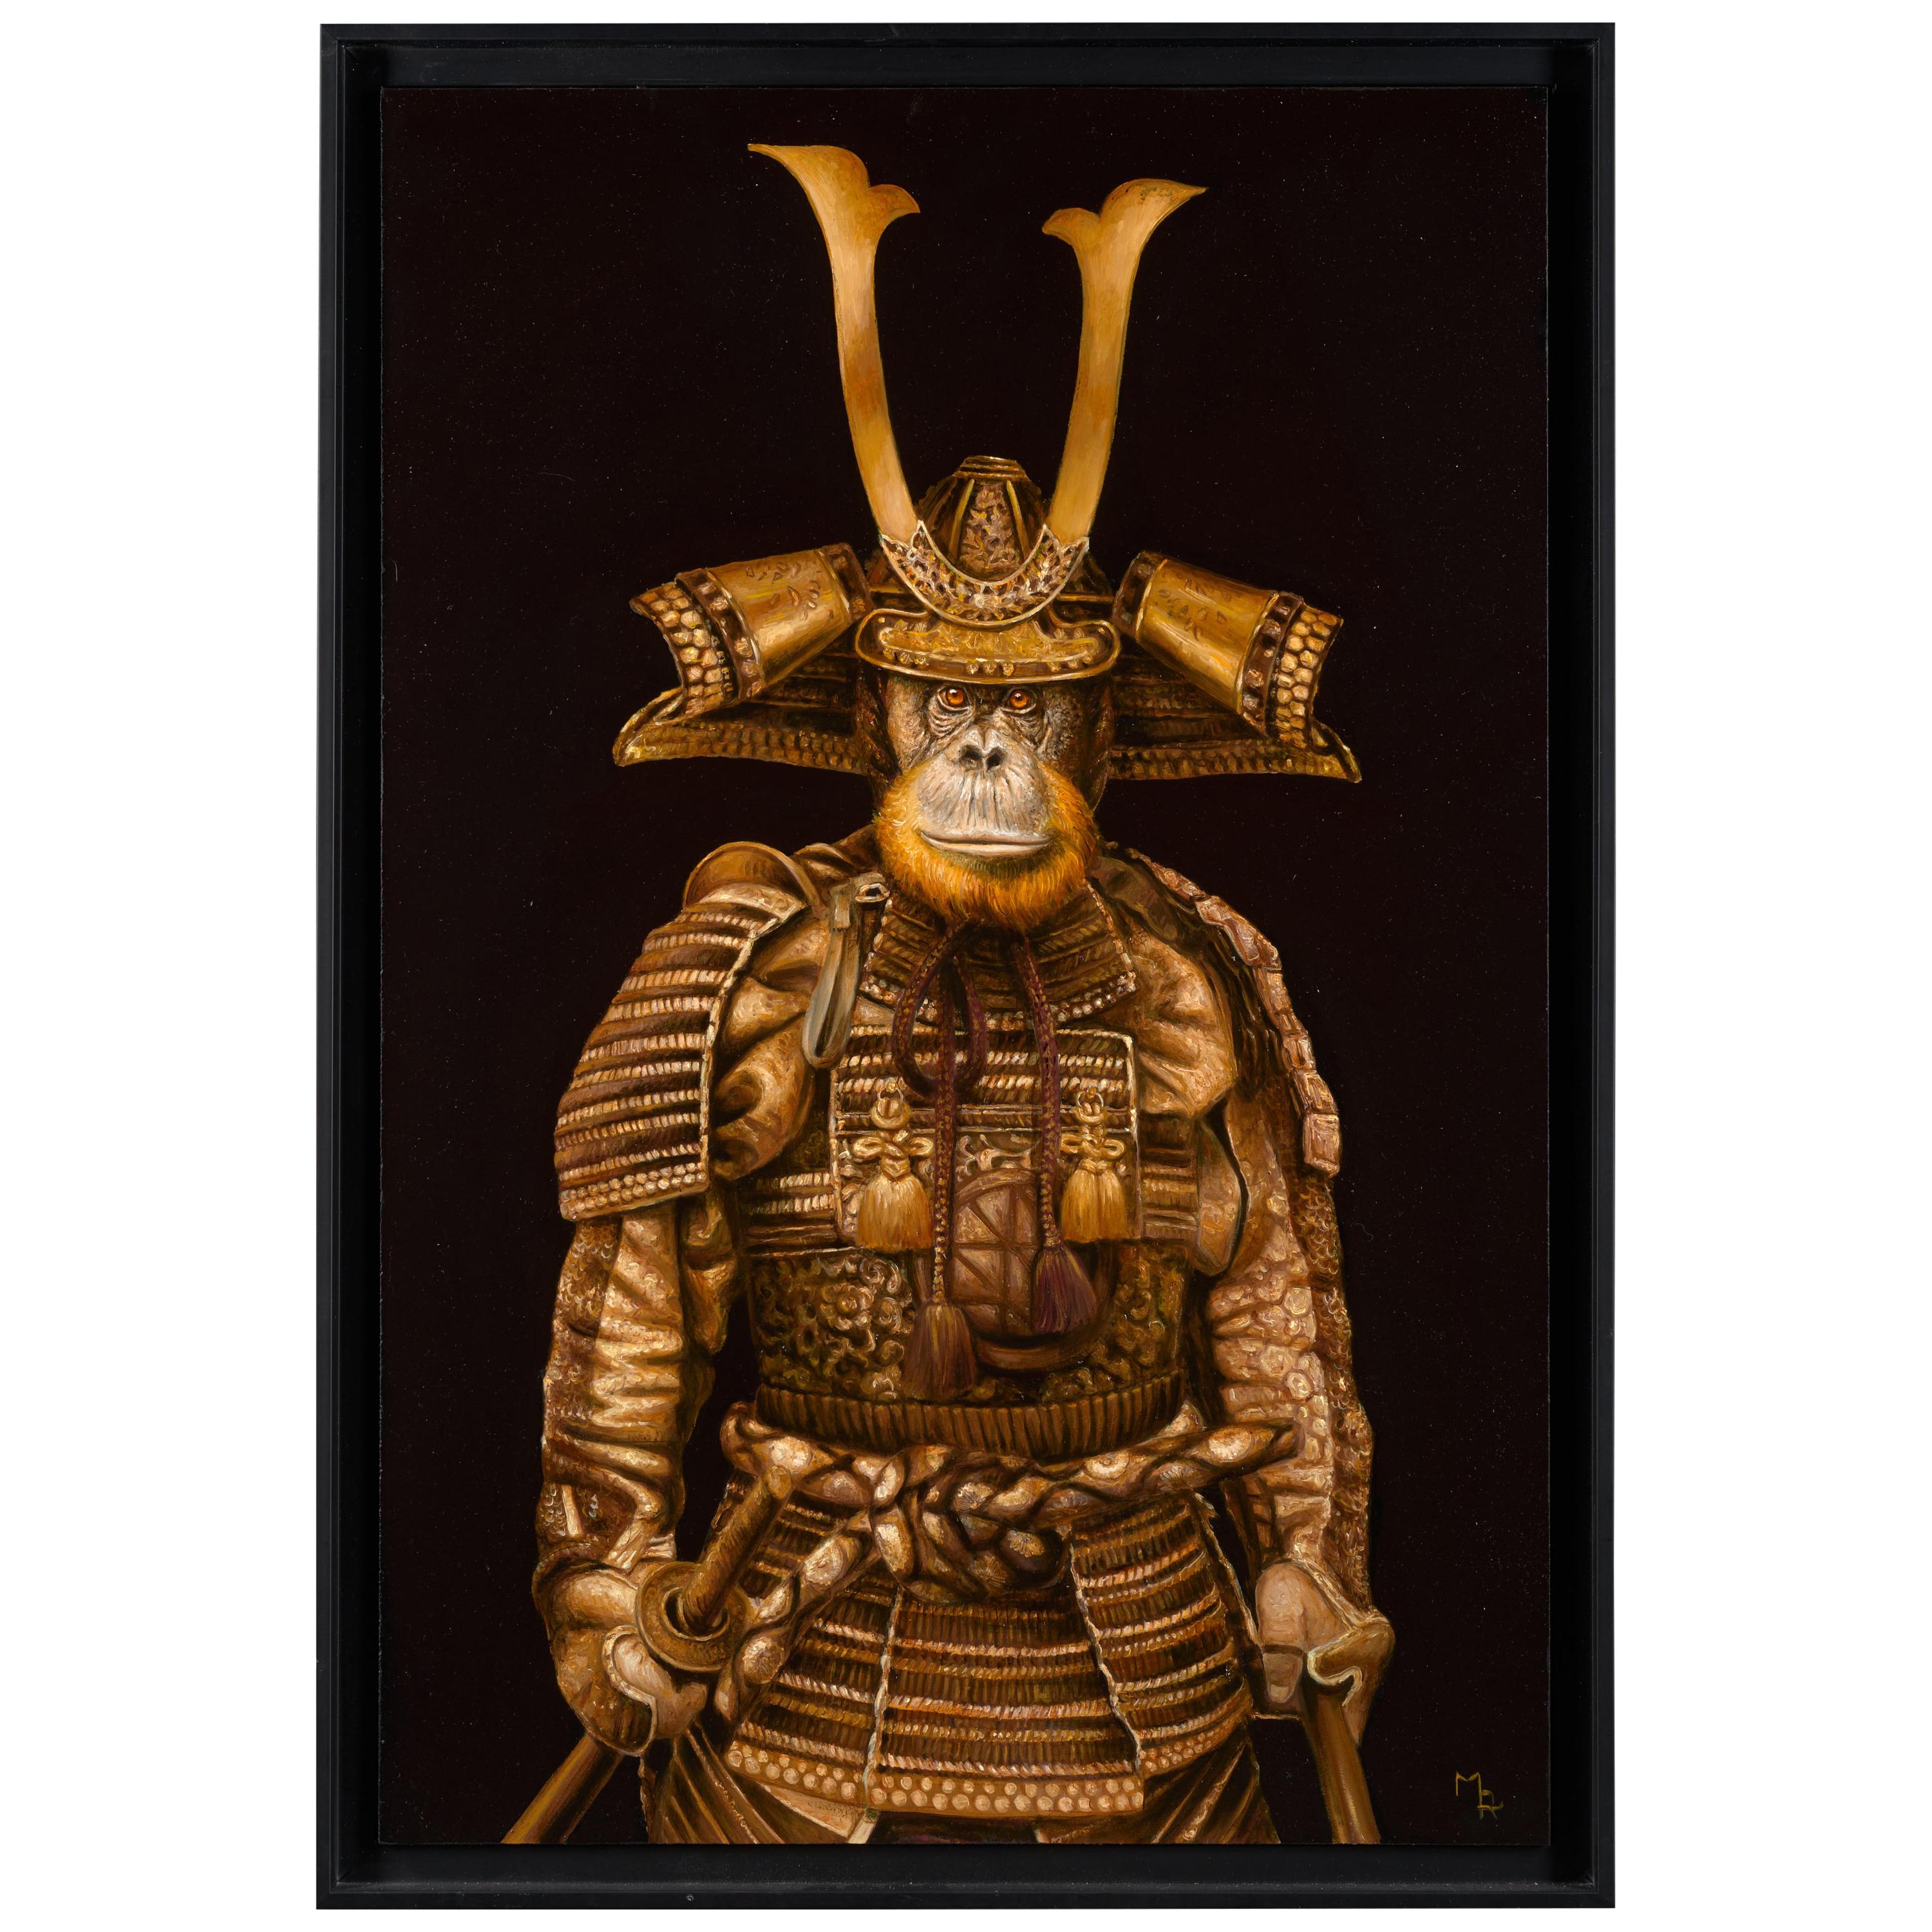 Marc Le Rest, Samurai Tomoe, Oil on Canvas, Framed, Signed and Dated